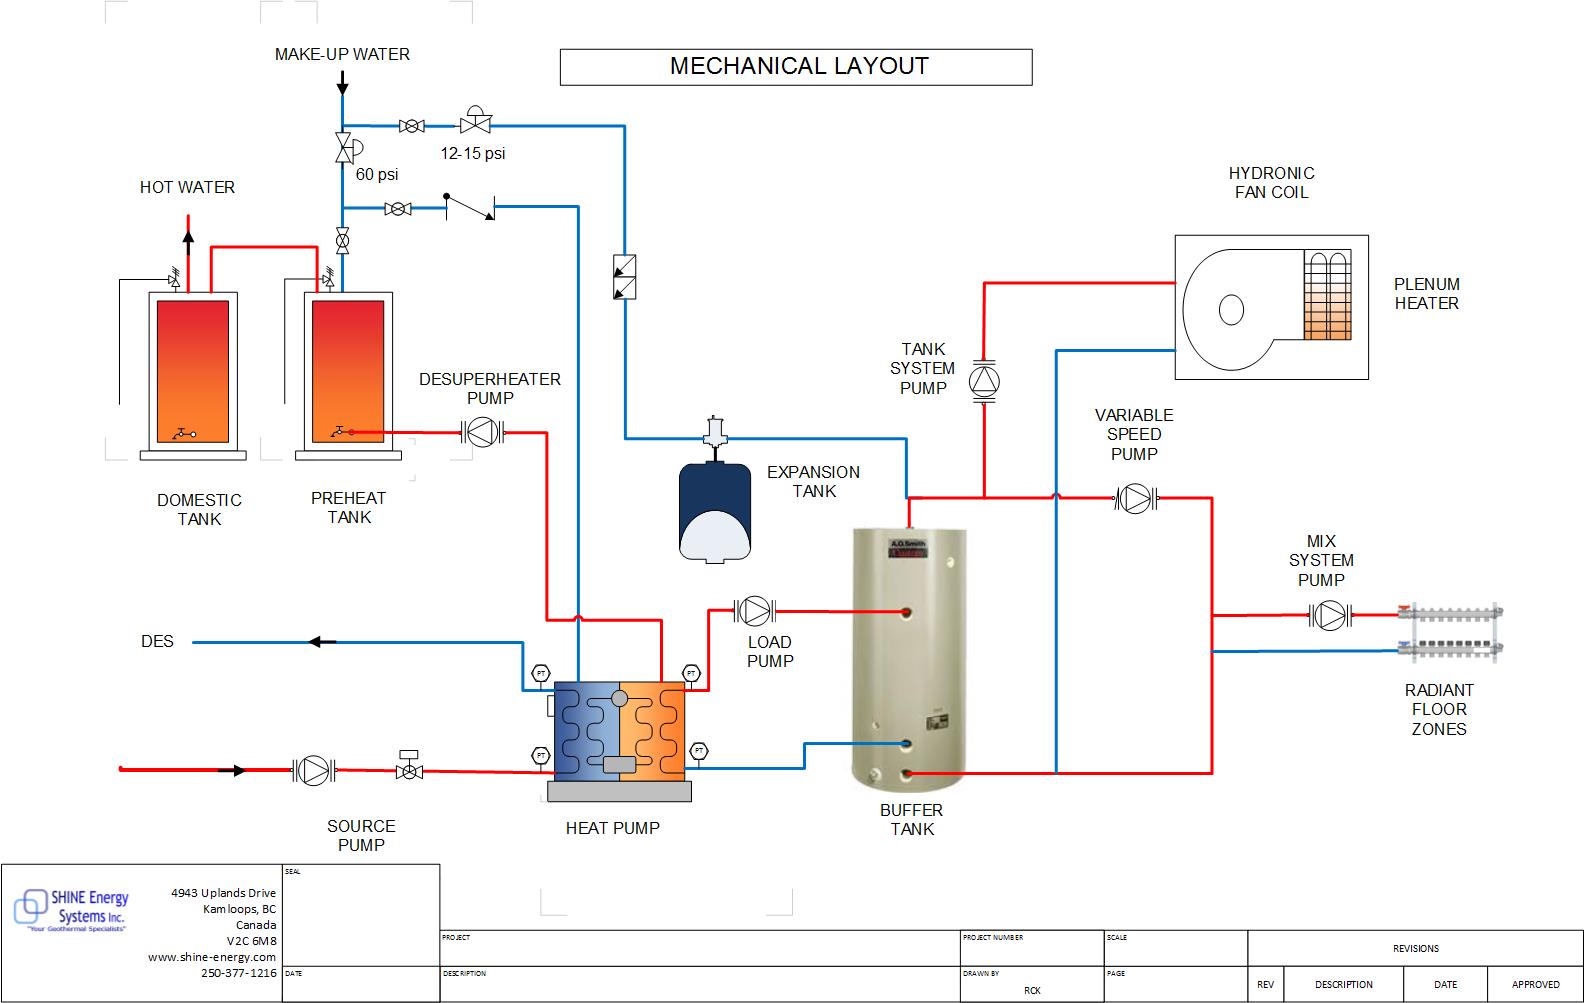 Water to Heat Pump + Fan Coil + Radiant Floor Schematic ... household wiring diagrams canada 